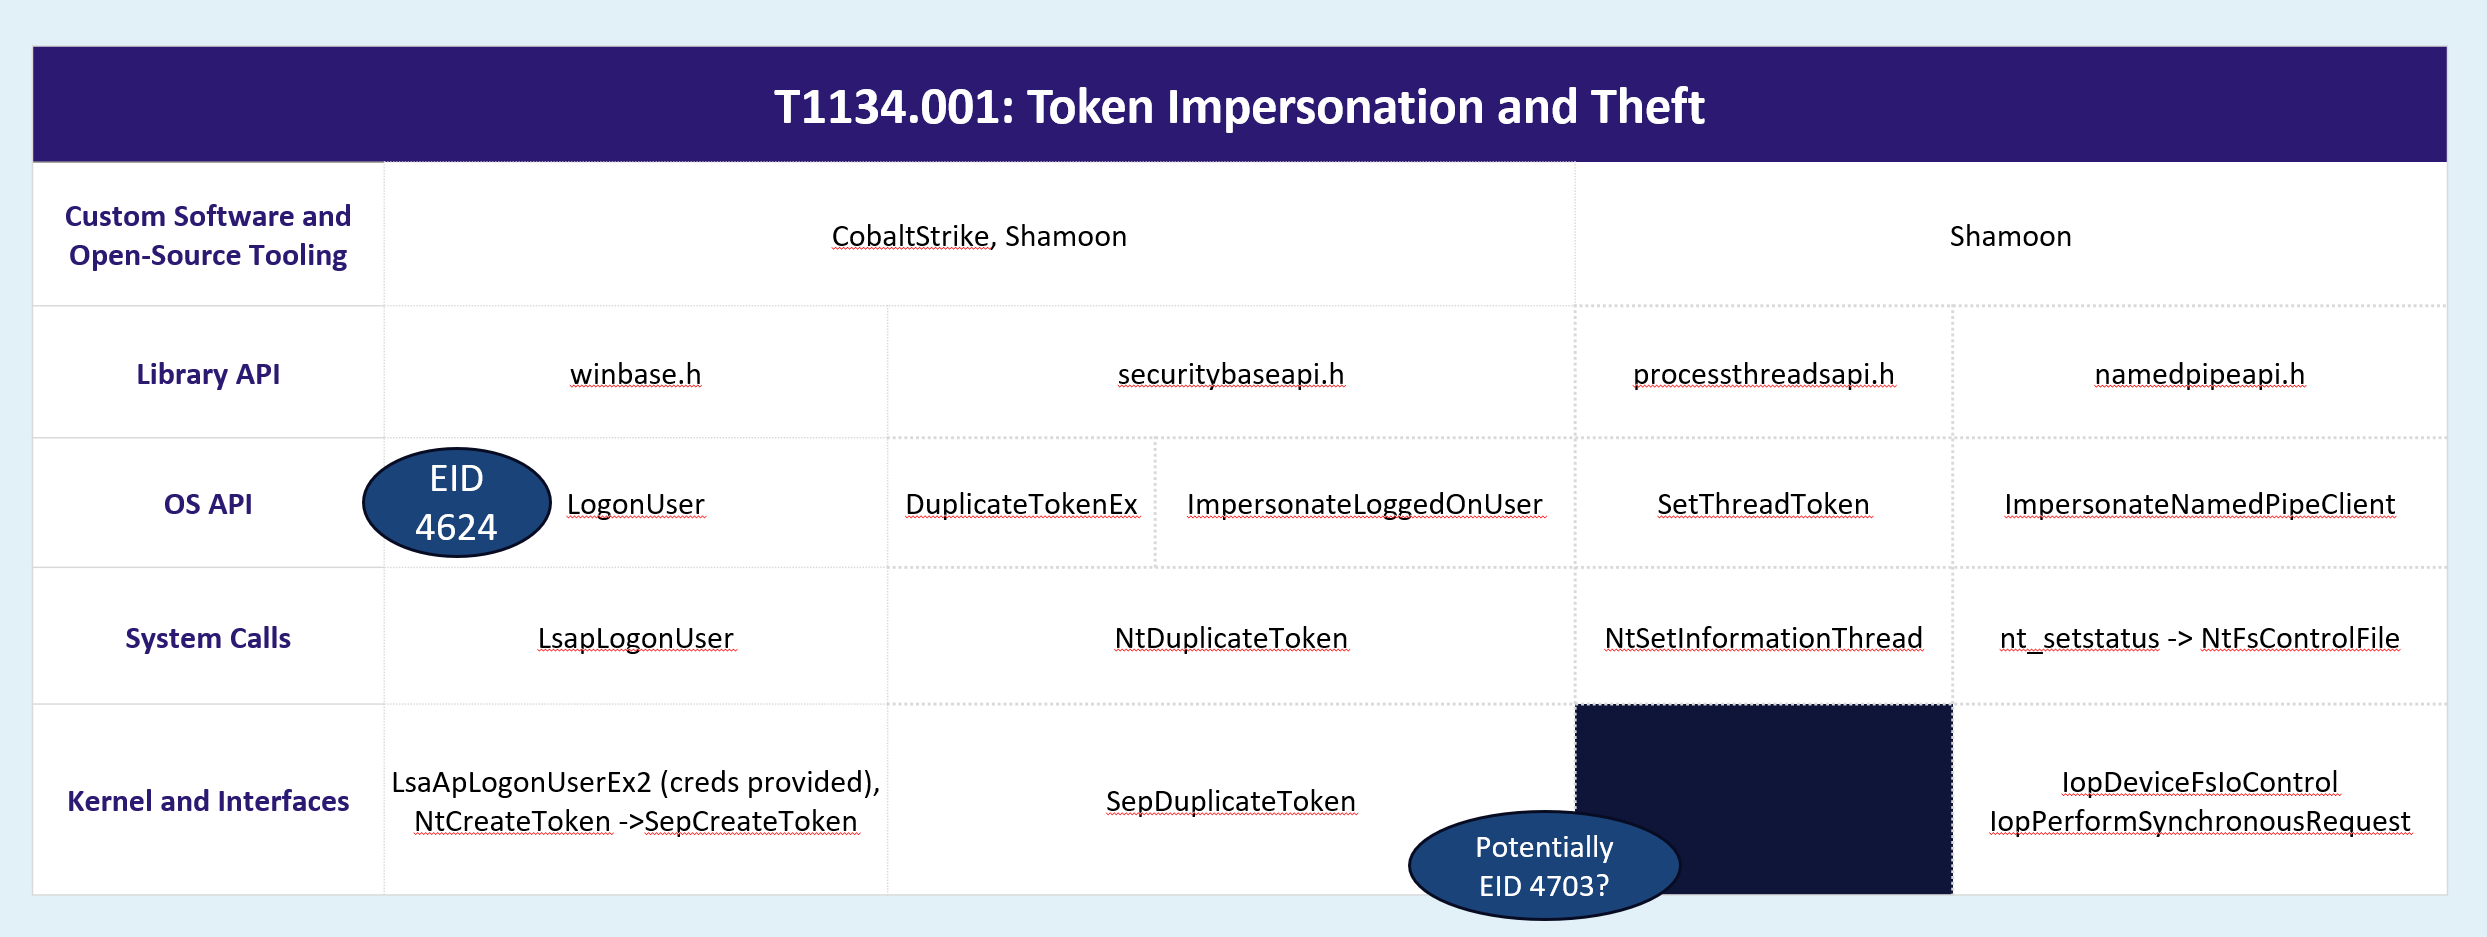 Capability abstraction map for API-based implementations of Access Token Manipulation: Token Impersonation and Theft